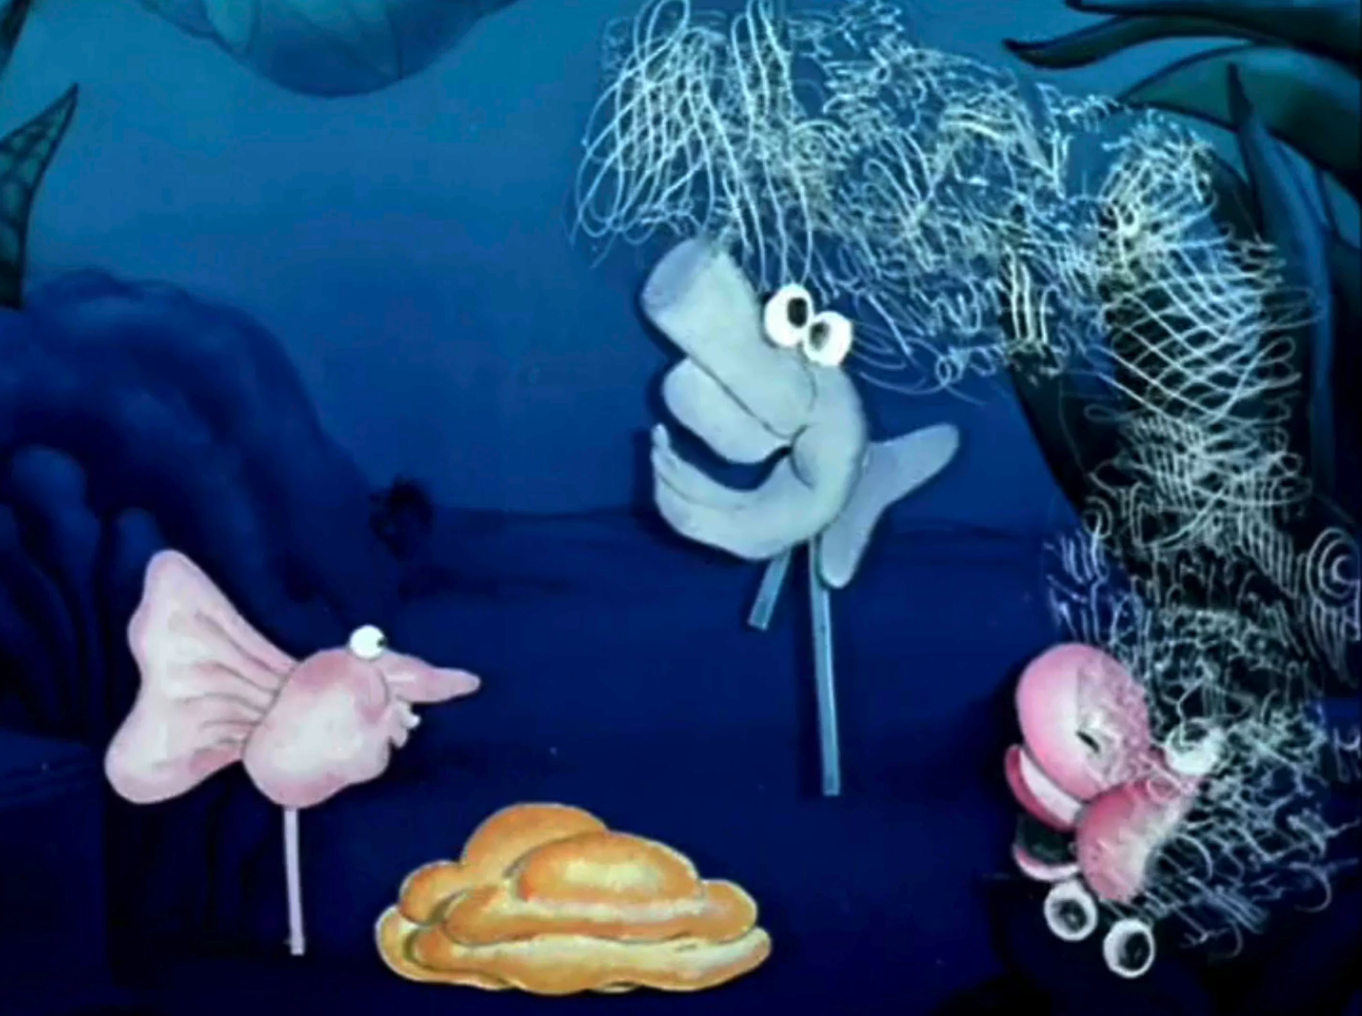 still from animation depicting hand drawn cartoonish creatures dance in a circle in a blue-toned environment. 